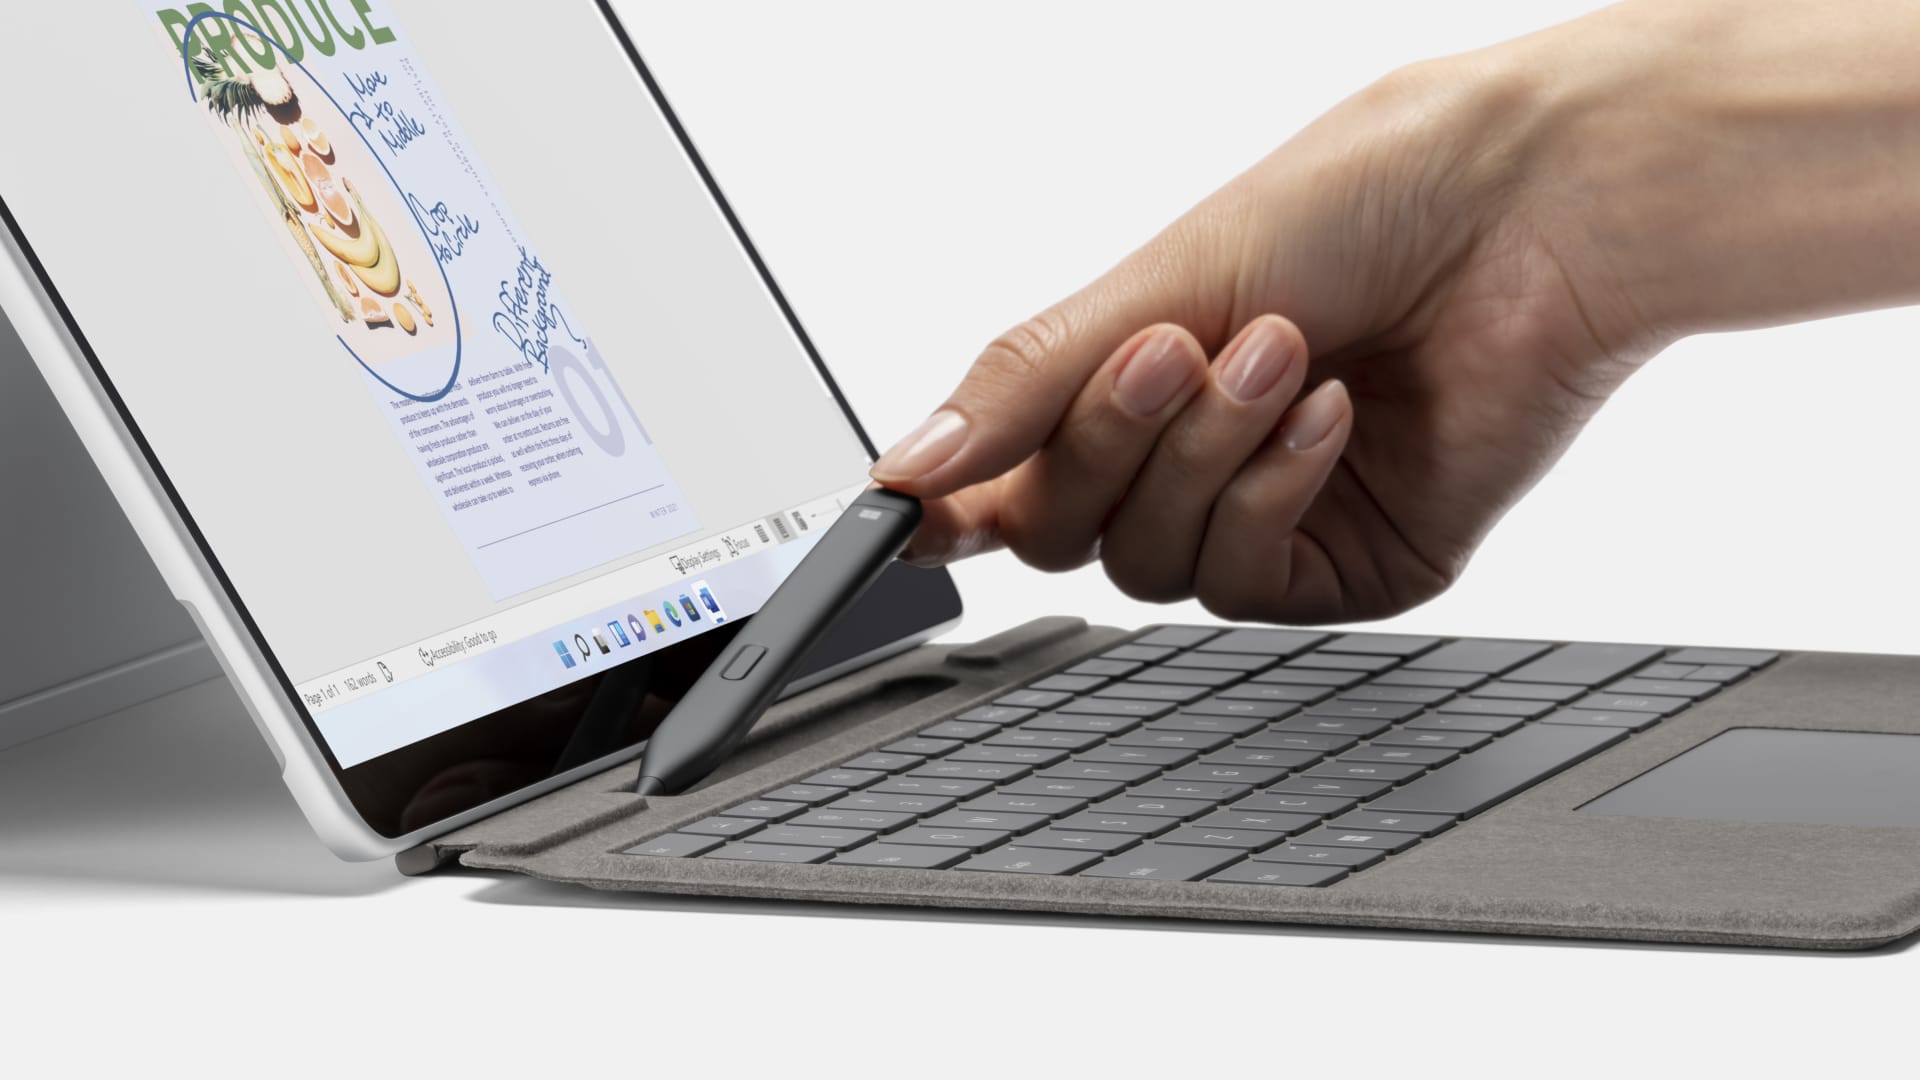 Microsoft's Surface Pro 8 has a new tray to securely store and charge the new Surface Slim Pen 2.